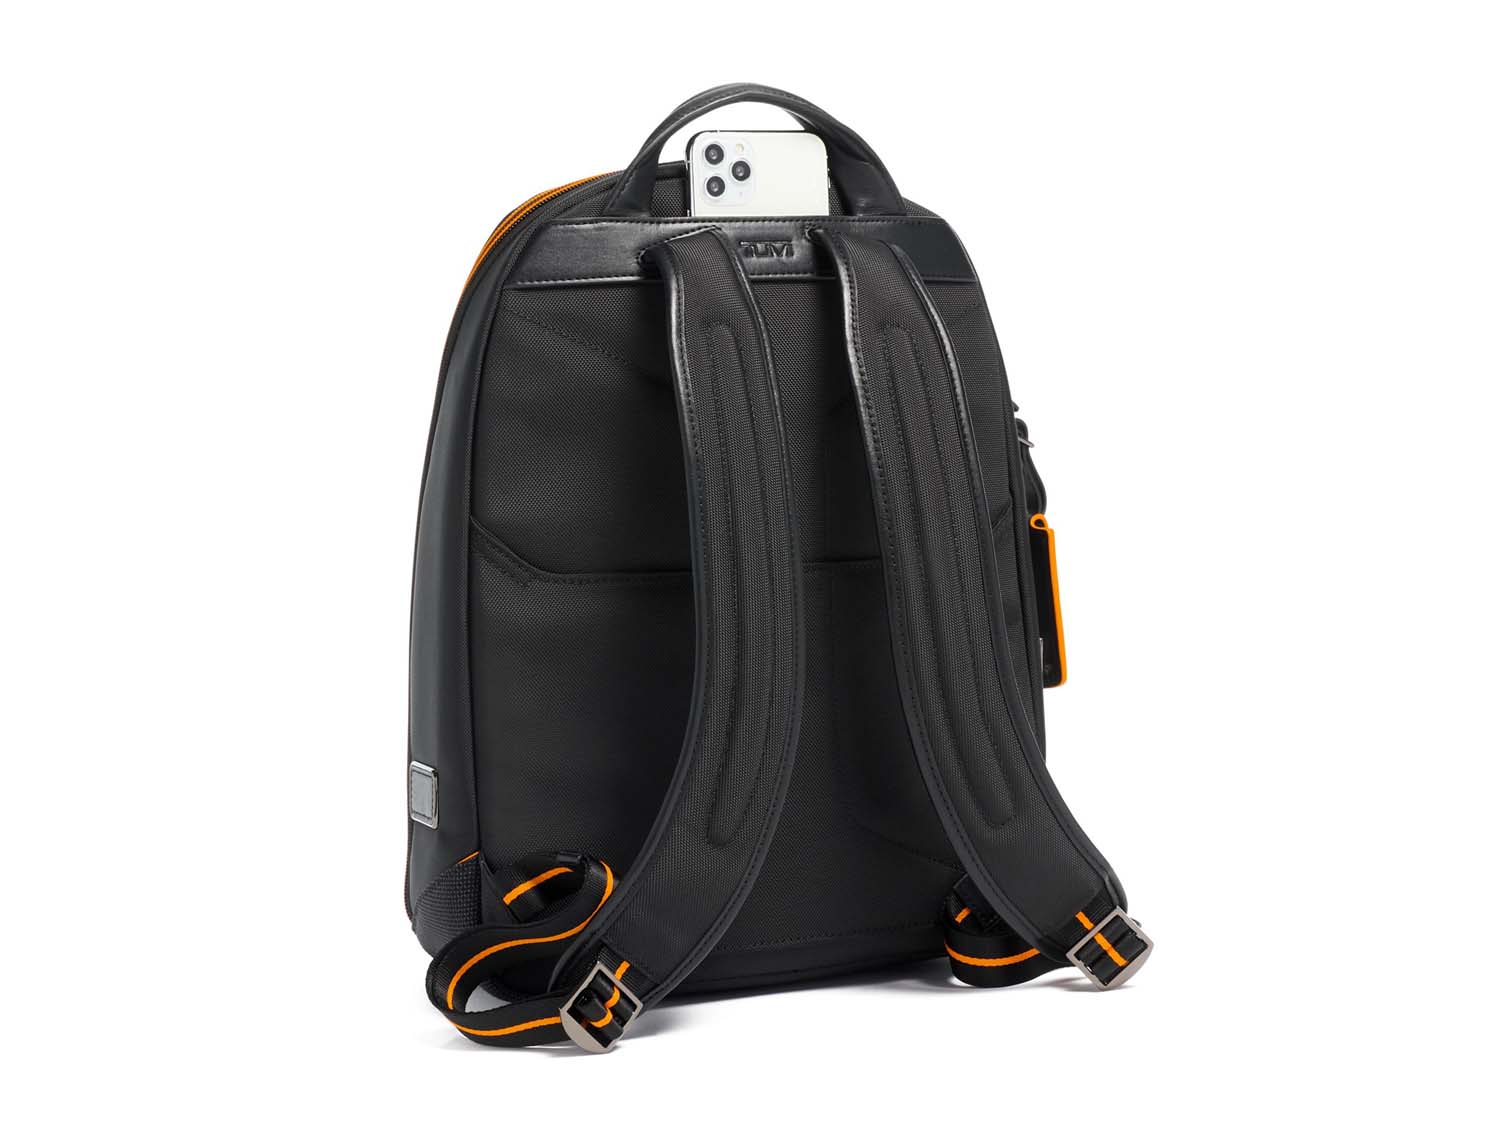 The Tumi Carson Backpack Is on Sale for $80 Off